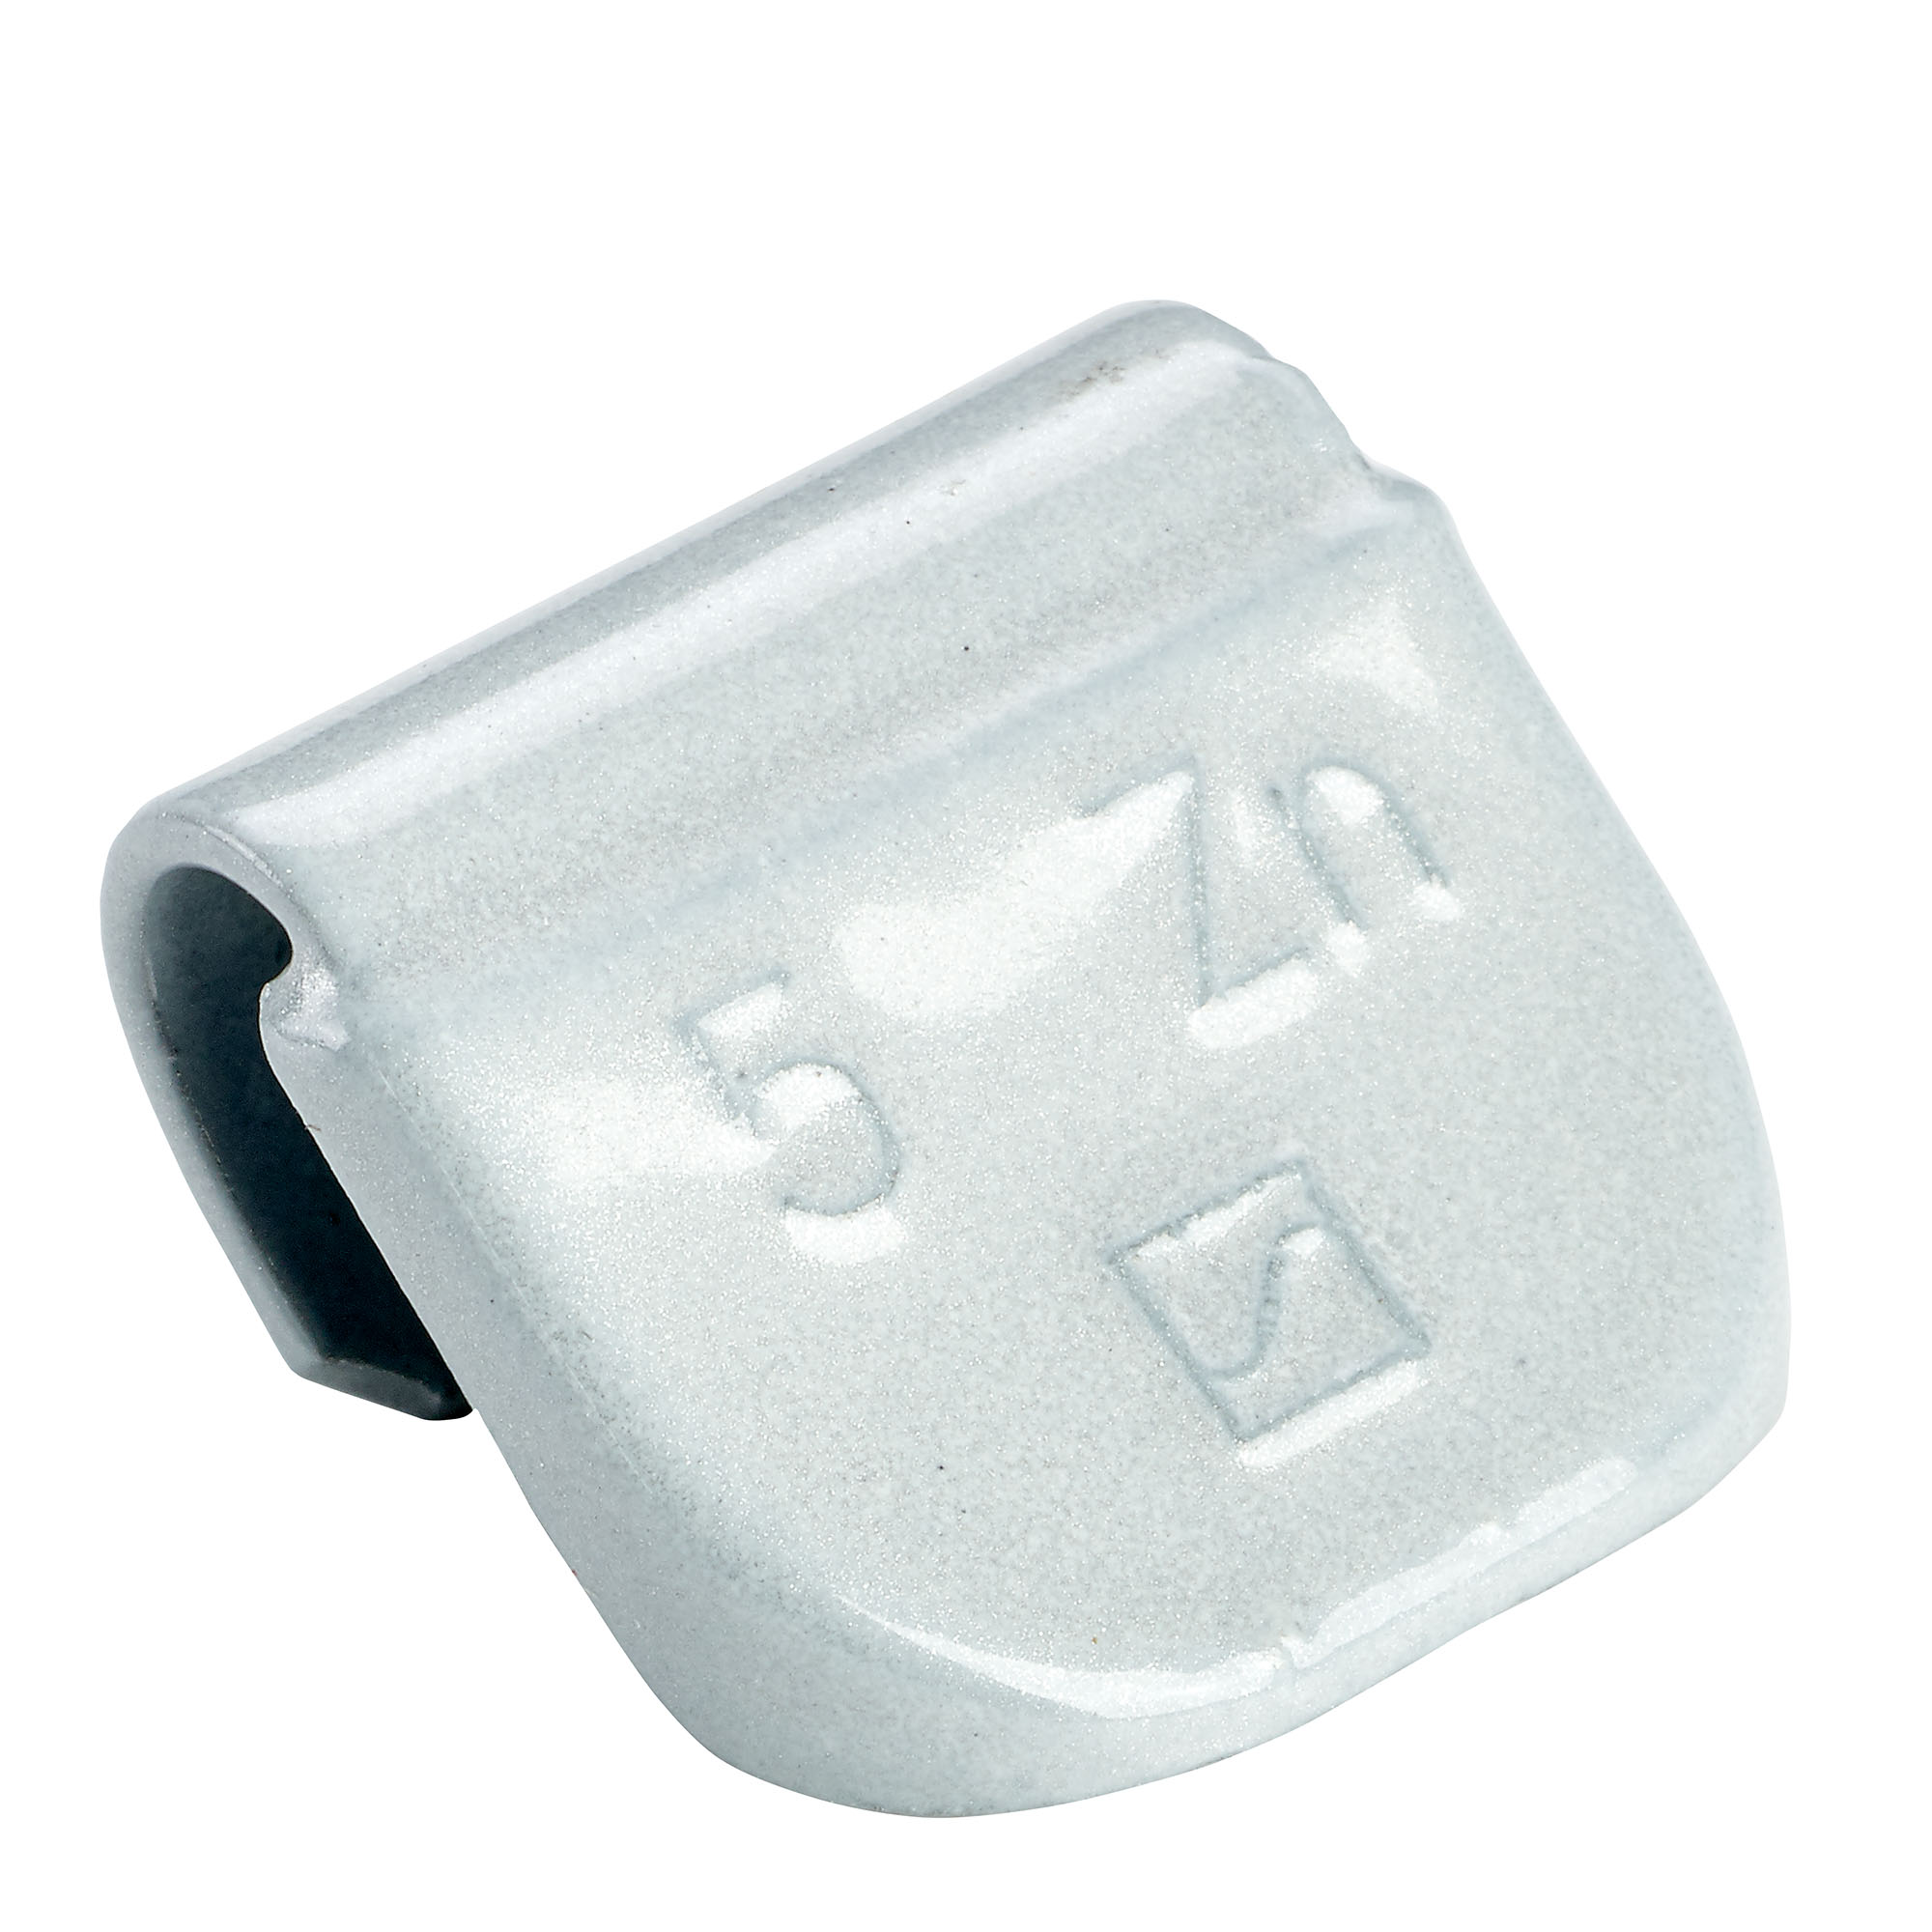 knock-on weight - Typ 160, 5 g, zinc, silver